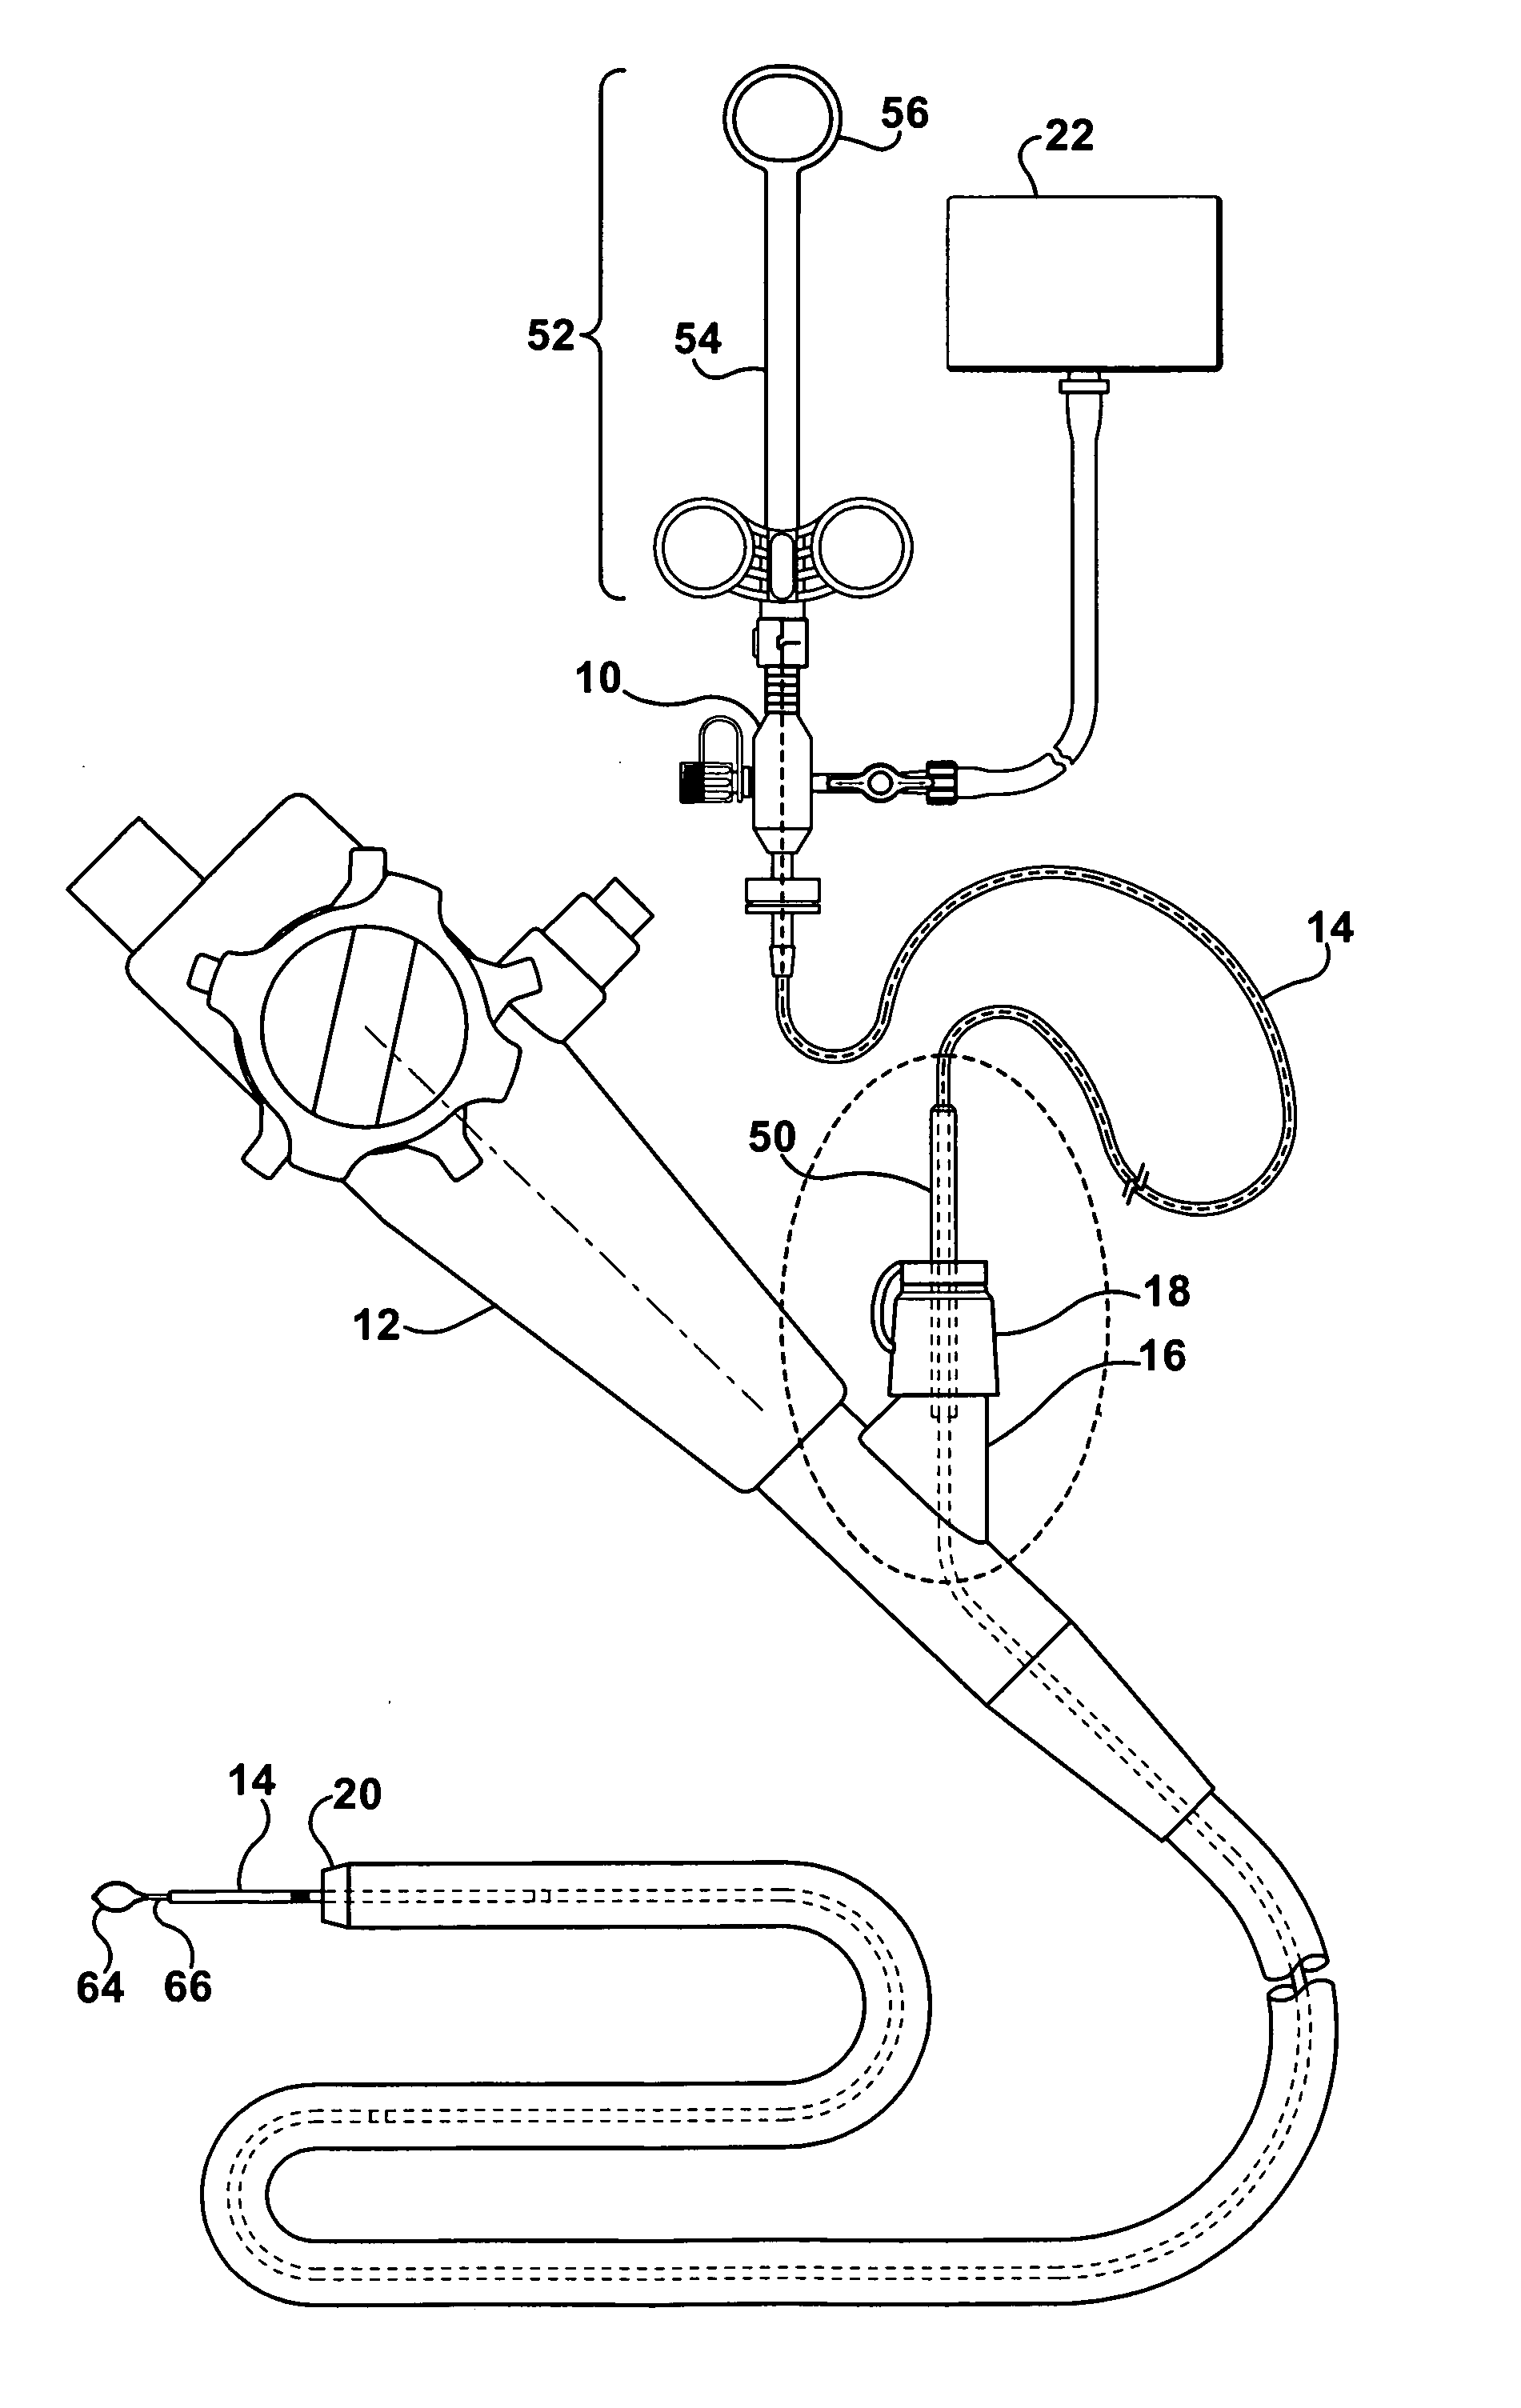 Polypectomy device and method of use